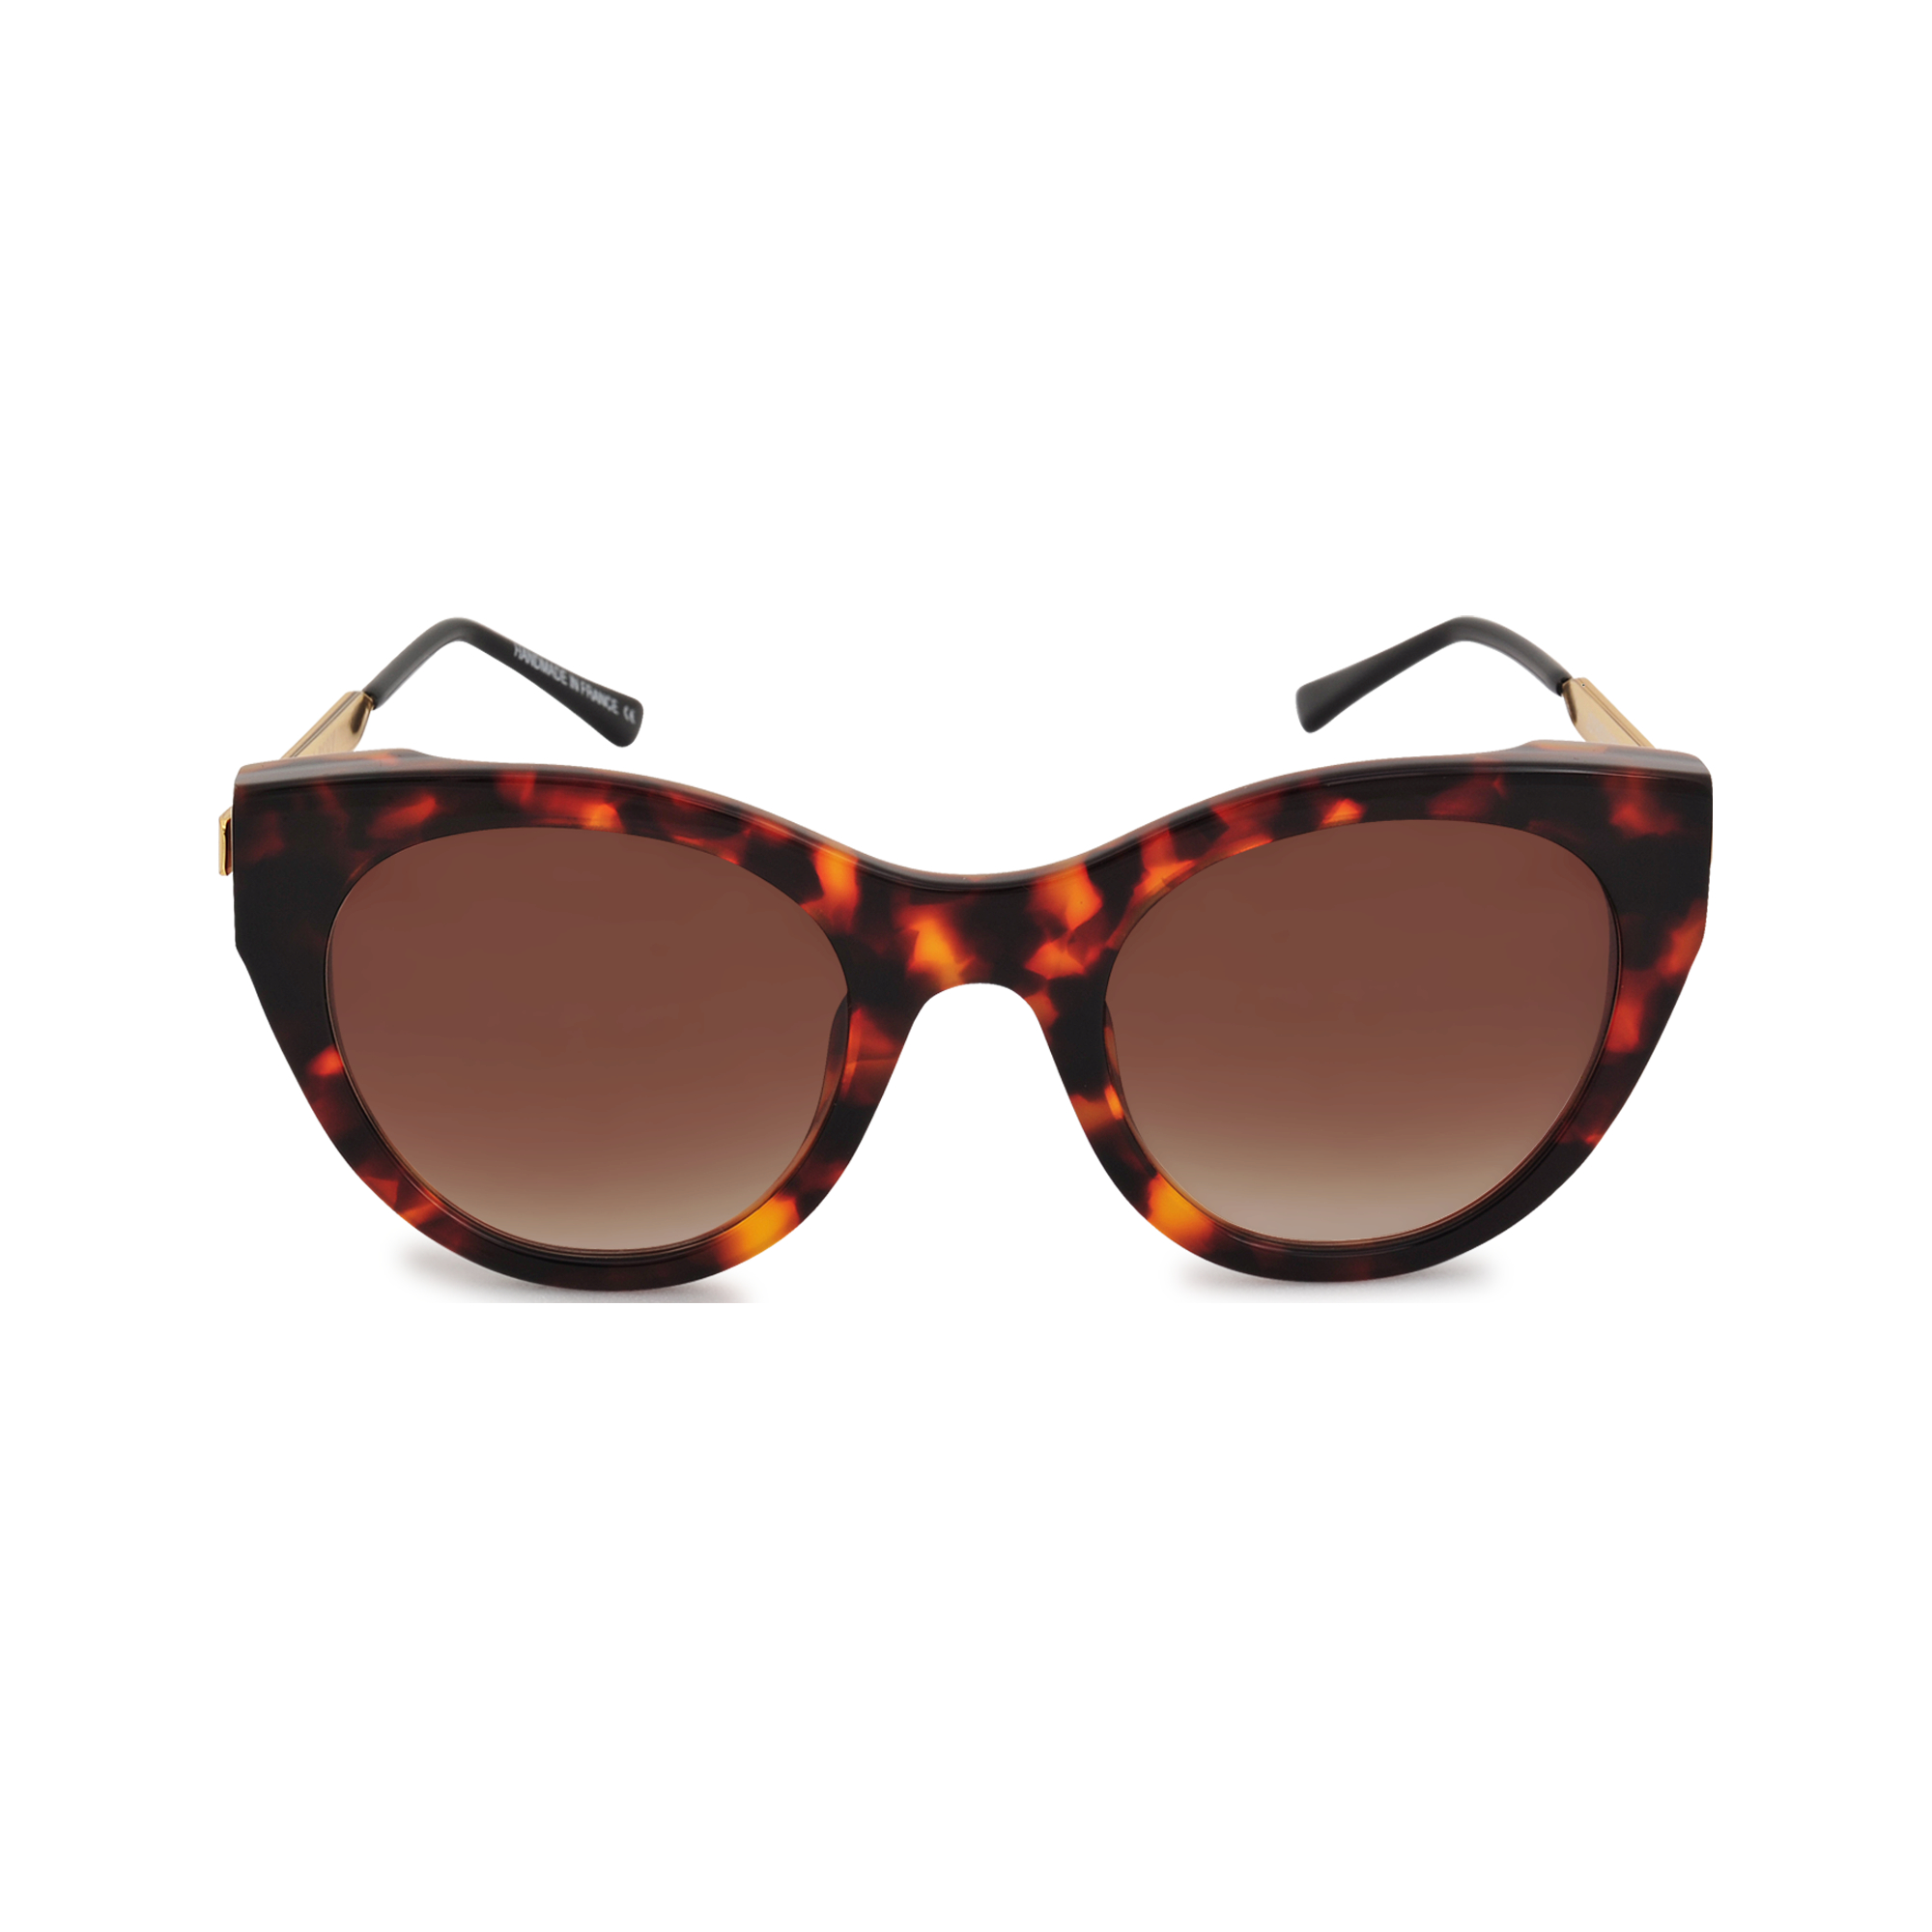 Lyst - Thierry Lasry Joyridy 008n Sunglasses in Brown